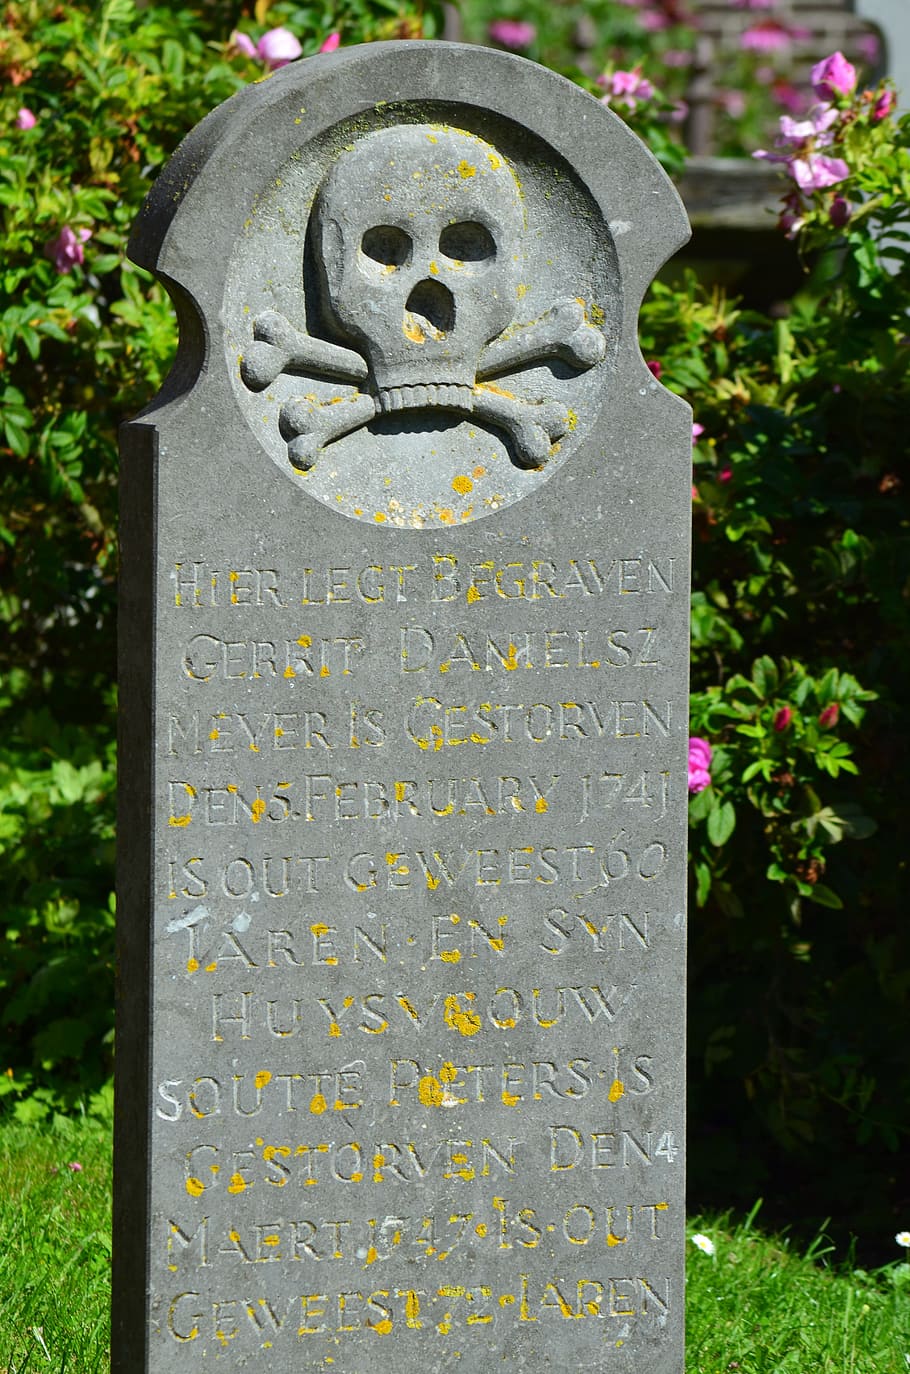 borkum, cemetery, tombstone, whalers cemetery, stone, island, sailors, skull and crossbones, historically, old